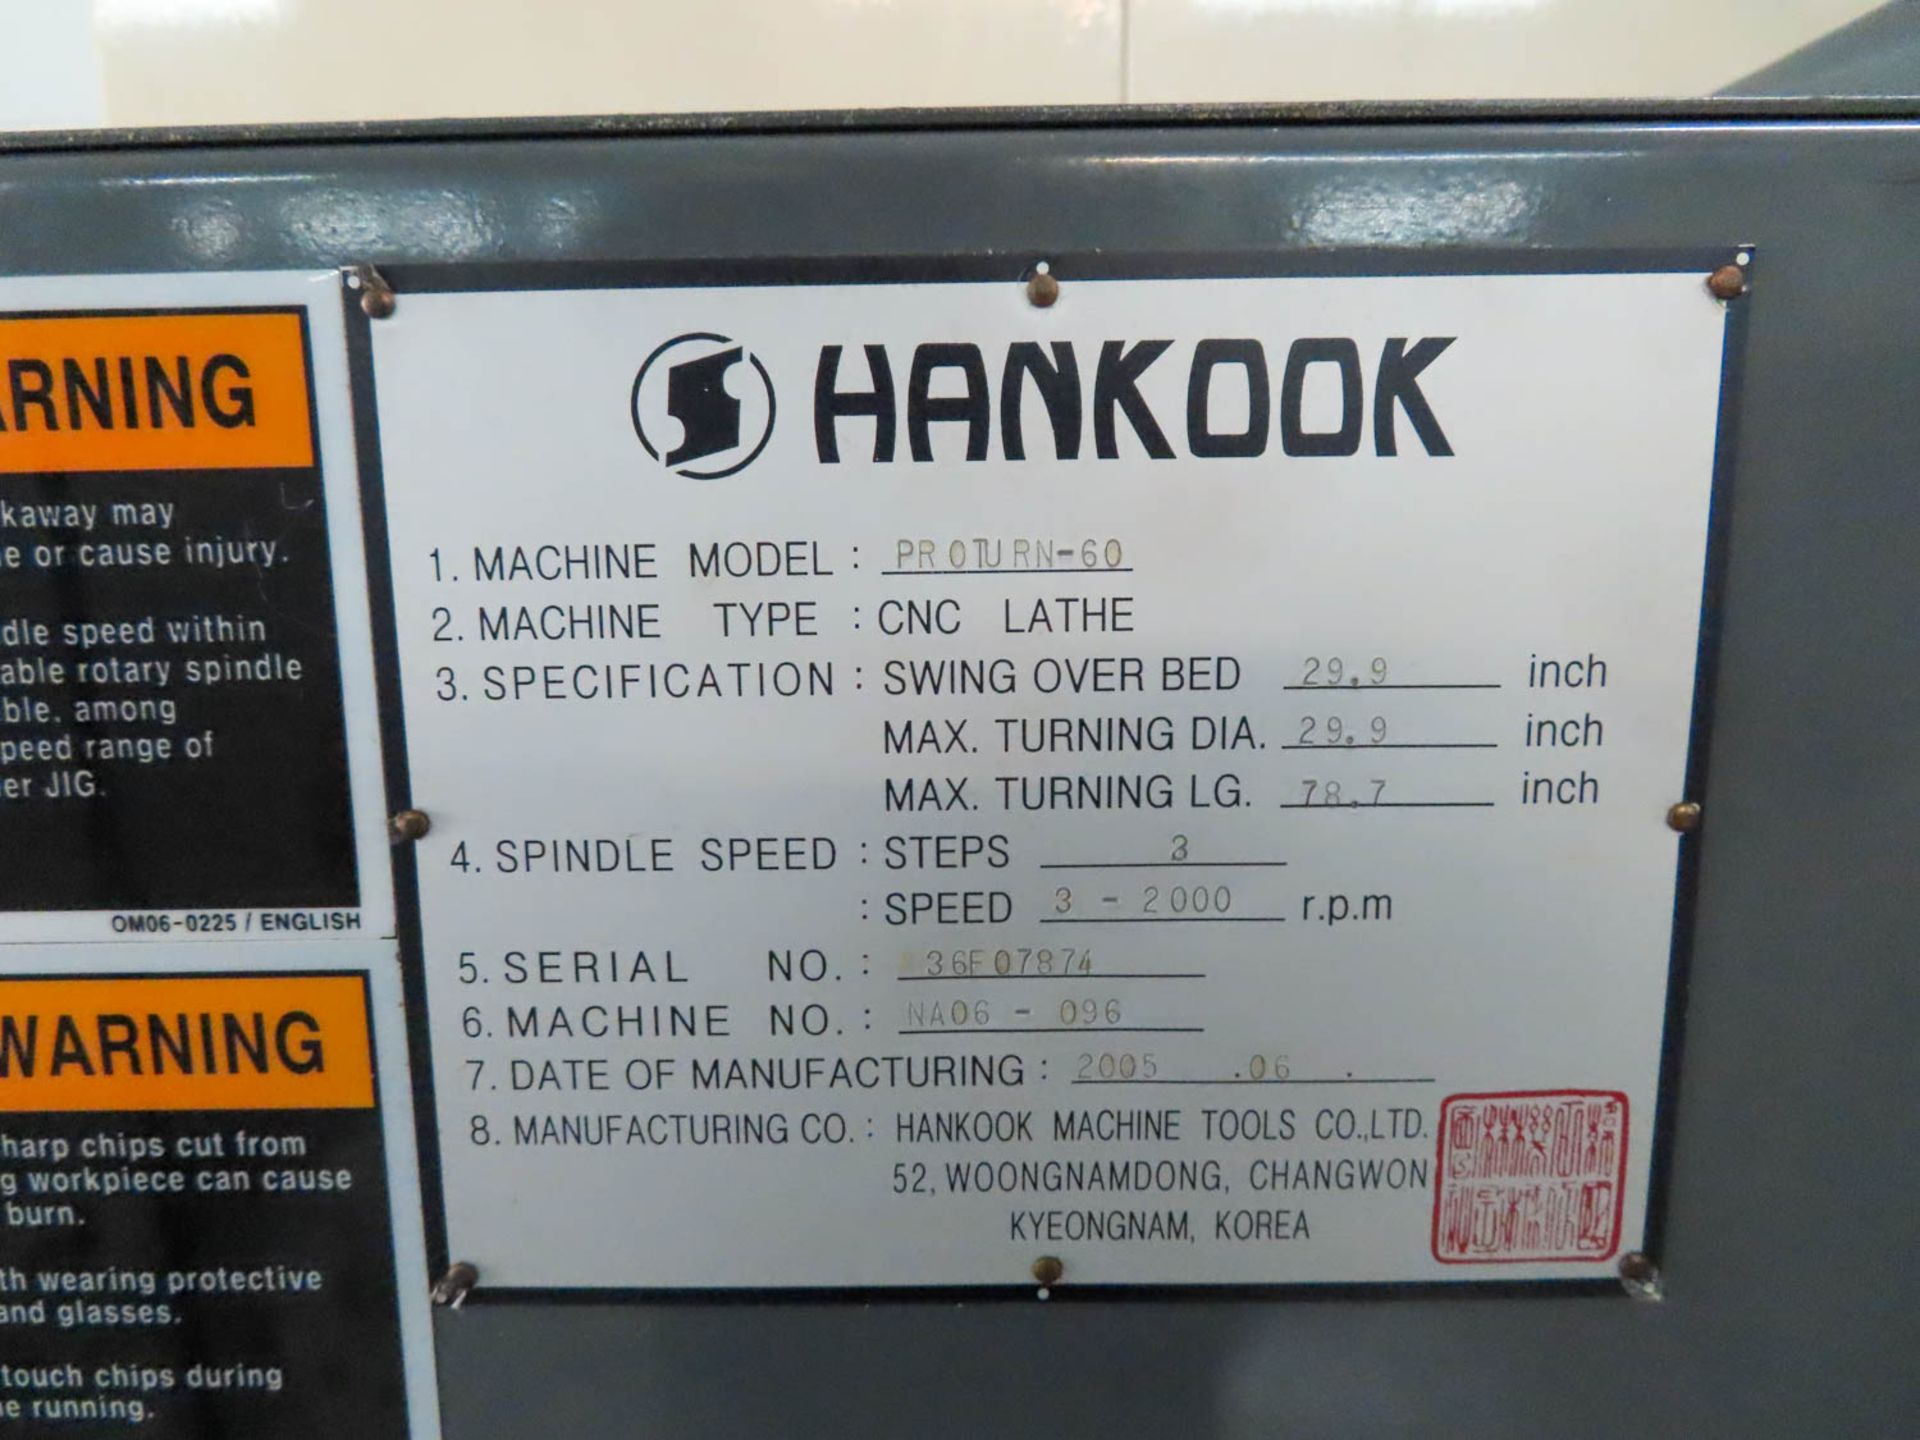 Hankook Proturn 60 X 2000 CNC Lathe, Fanuc 18iTB CNC, 29.9" Swing Over Bed, 29.9" Max. Turning(2005) - Image 6 of 10